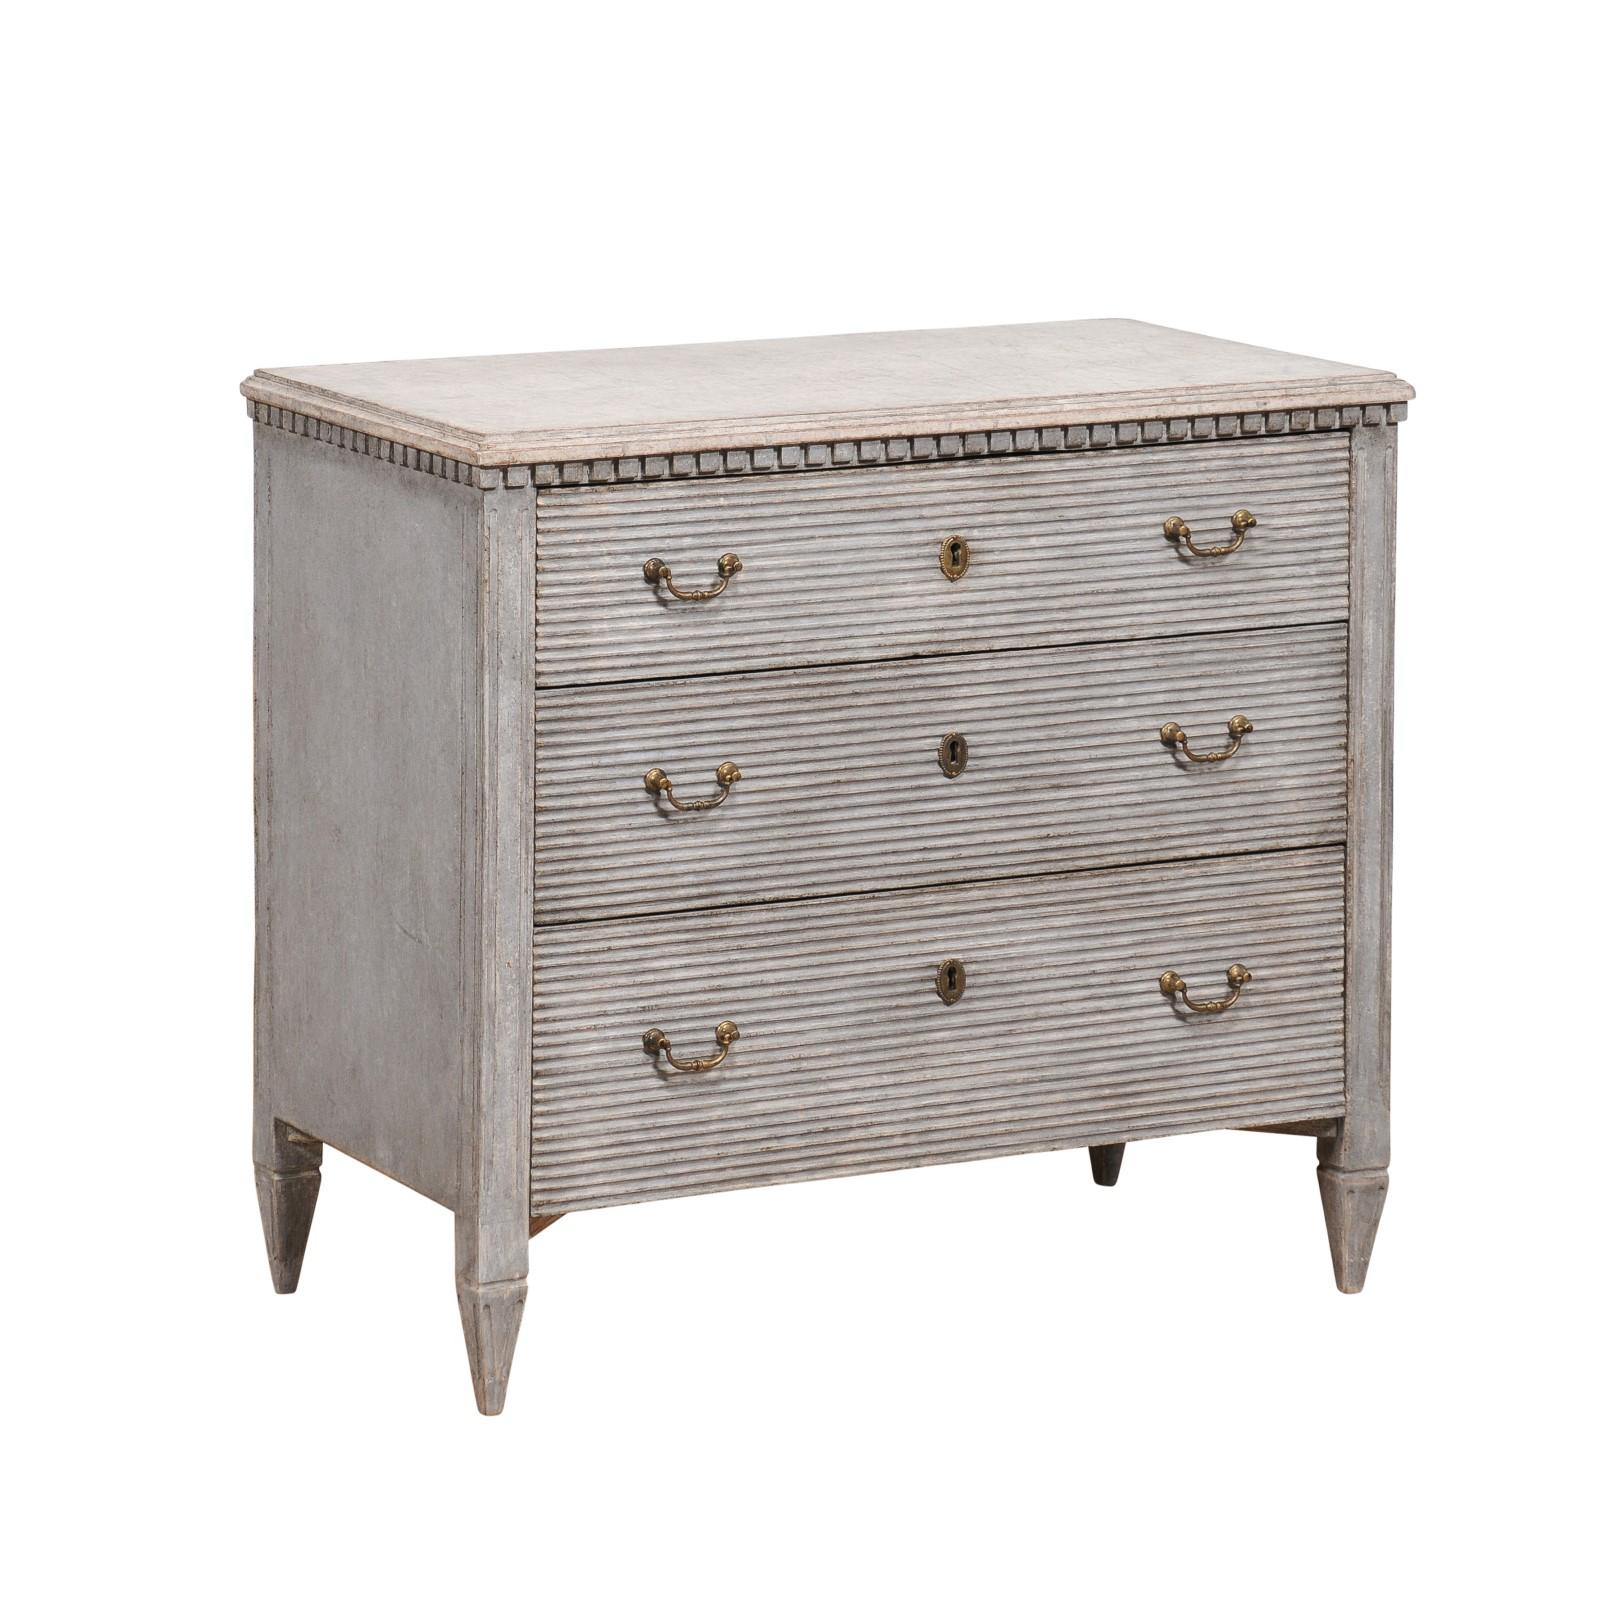 A Swedish Gustavian style chest from the 19th century with gray painted finish, three drawers, carved dentil molding and reeded accents. This Swedish Gustavian style chest, hailing from the 19th century, exudes timeless charm with its sophisticated